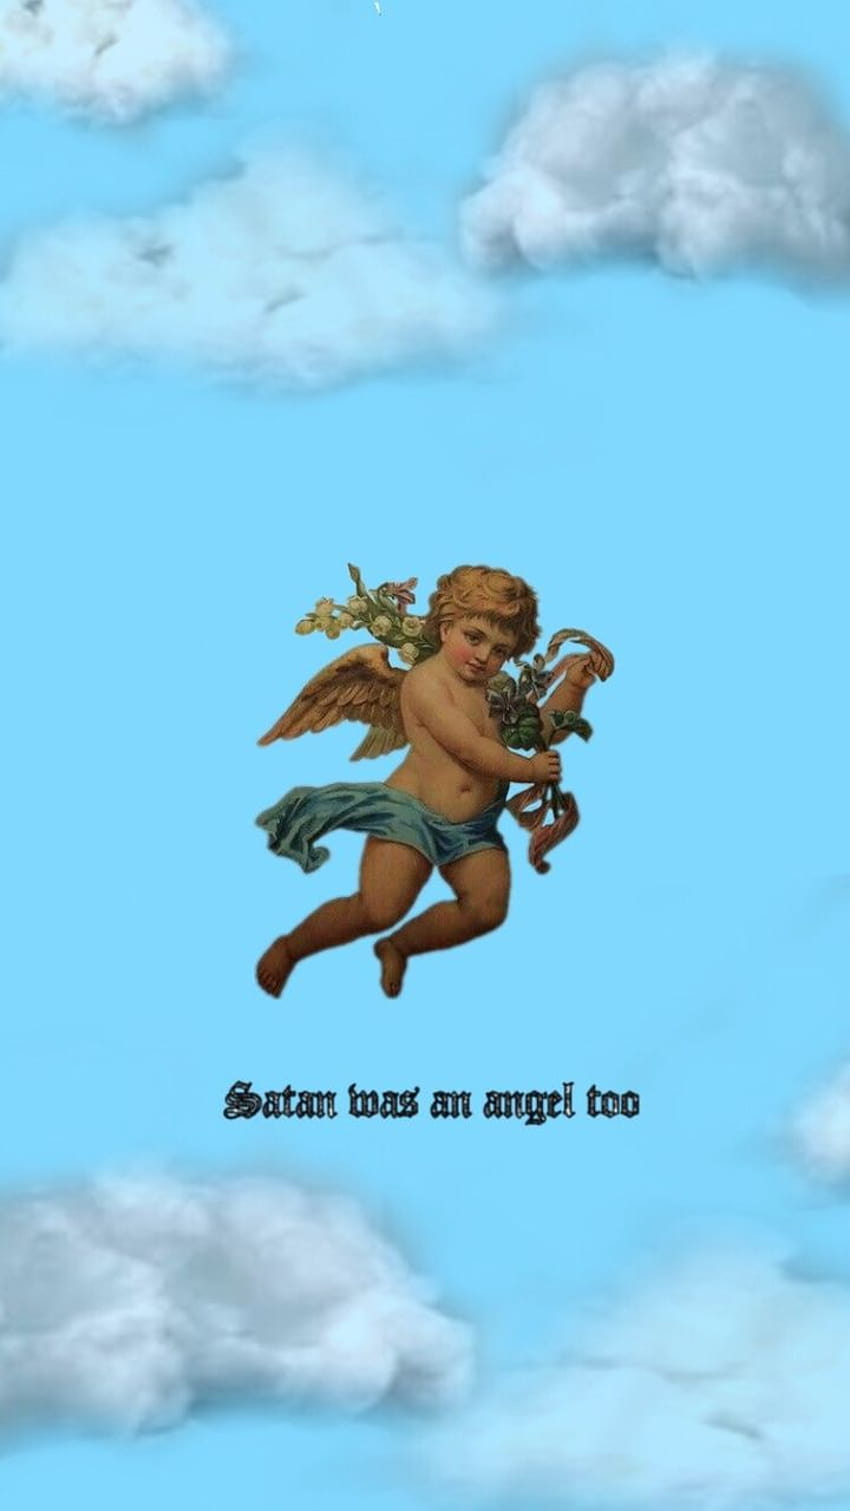 An angel with a gun in the sky - Angels